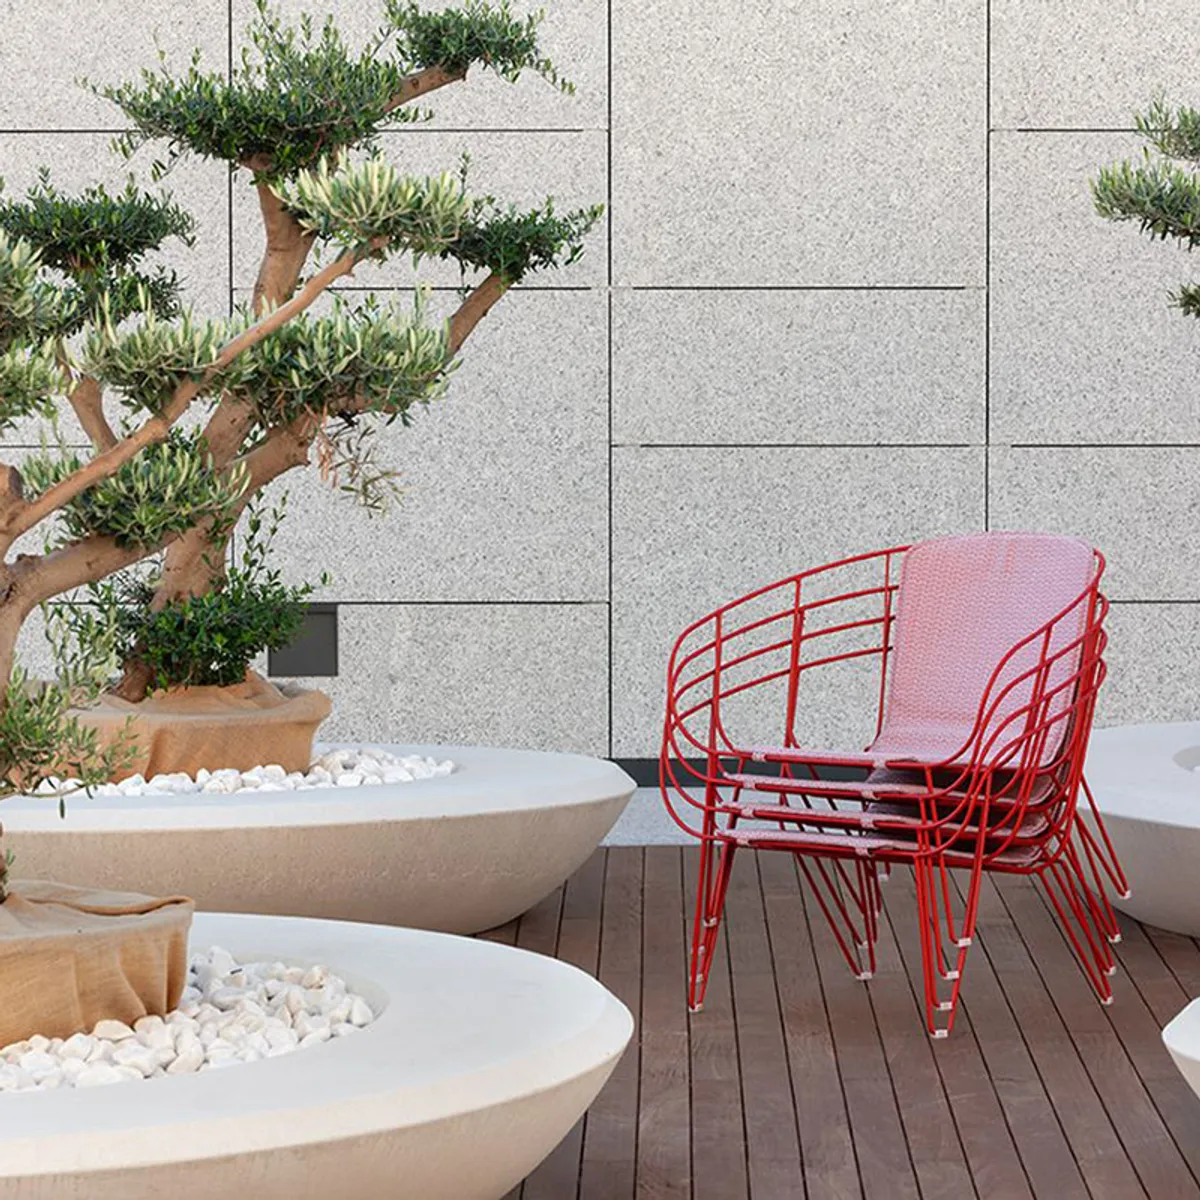 Cava Lounge Chair In Red Metal With Seat Cushion Furniture For Outdoor Hotel Gardens And Hospitality Restaurants Insideoutcontracts